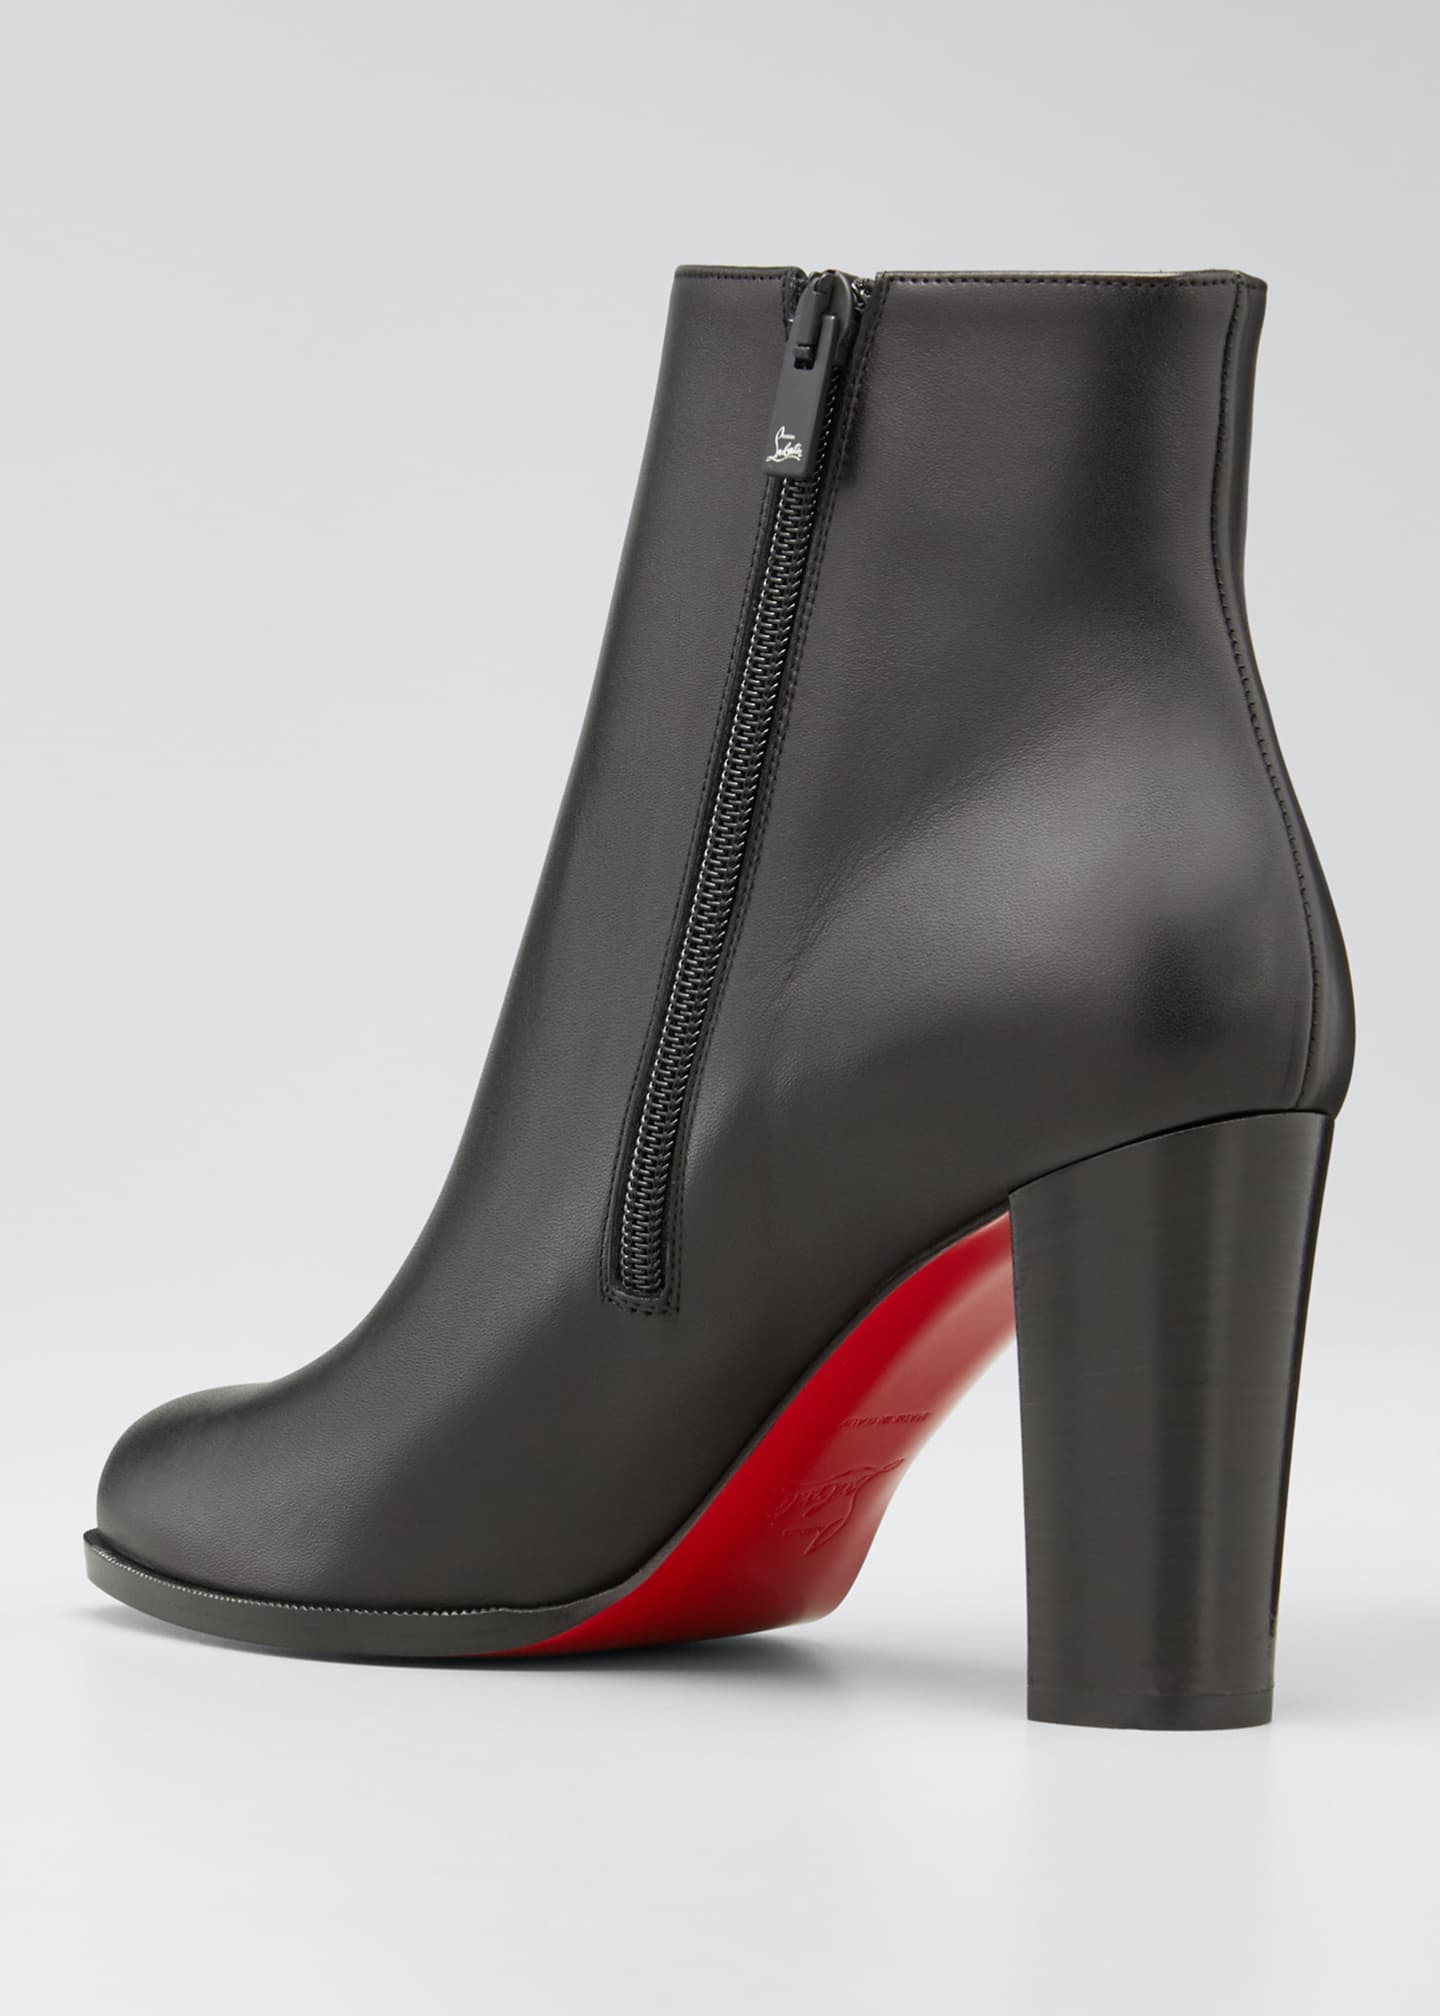 louboutin red bottom boots